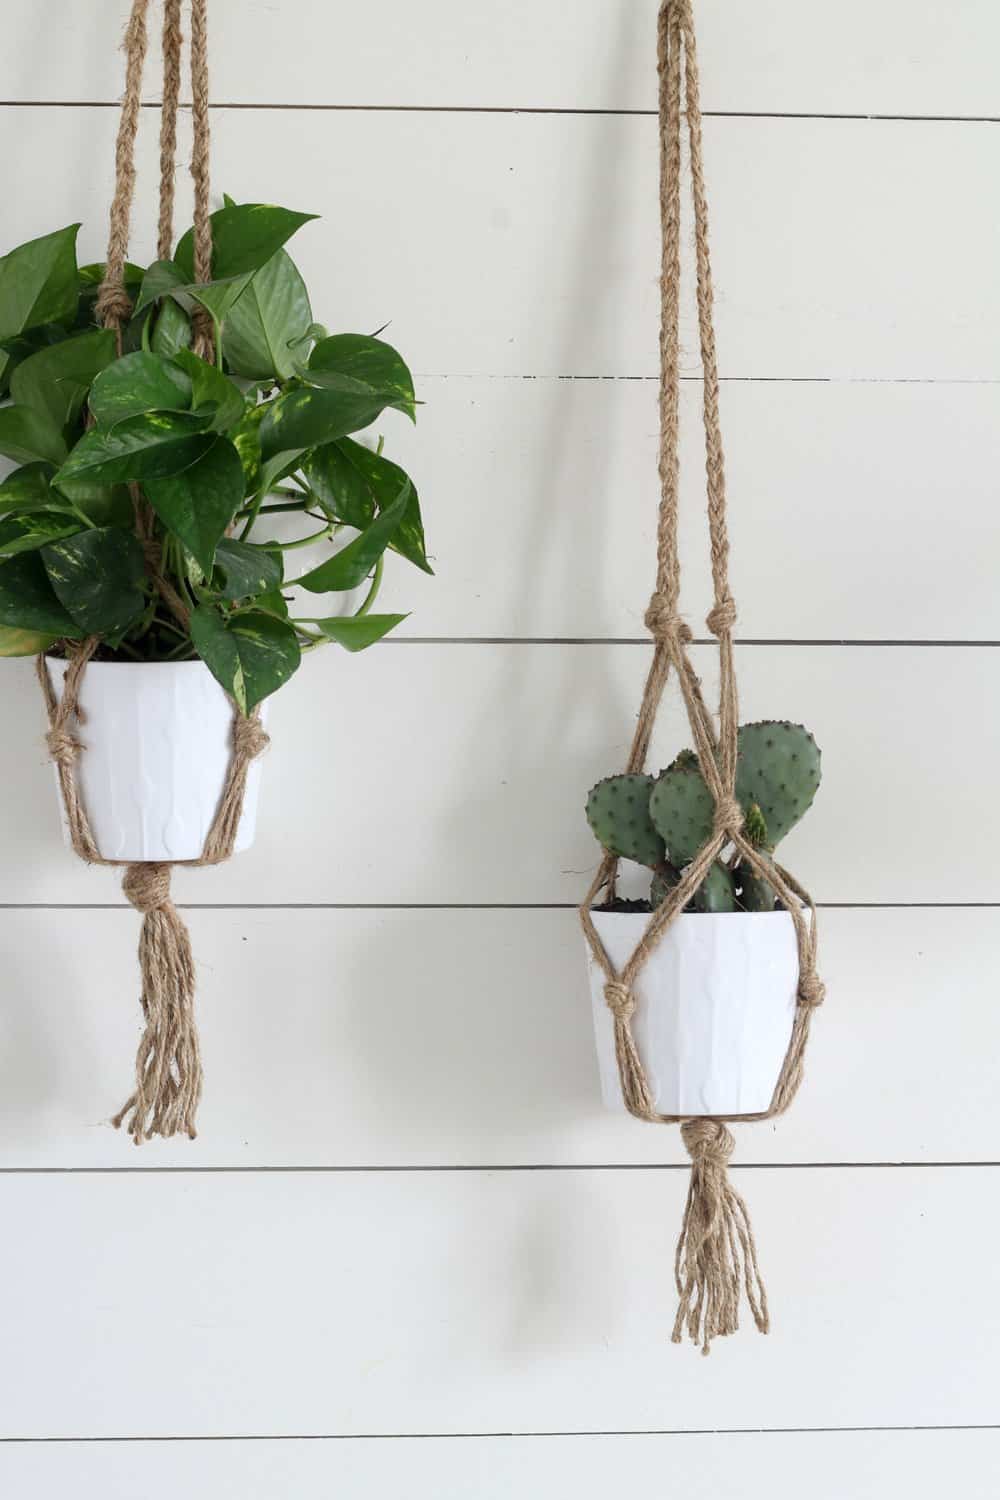 Let's Make An Easy Macrame Plant Holder With Jute Strings